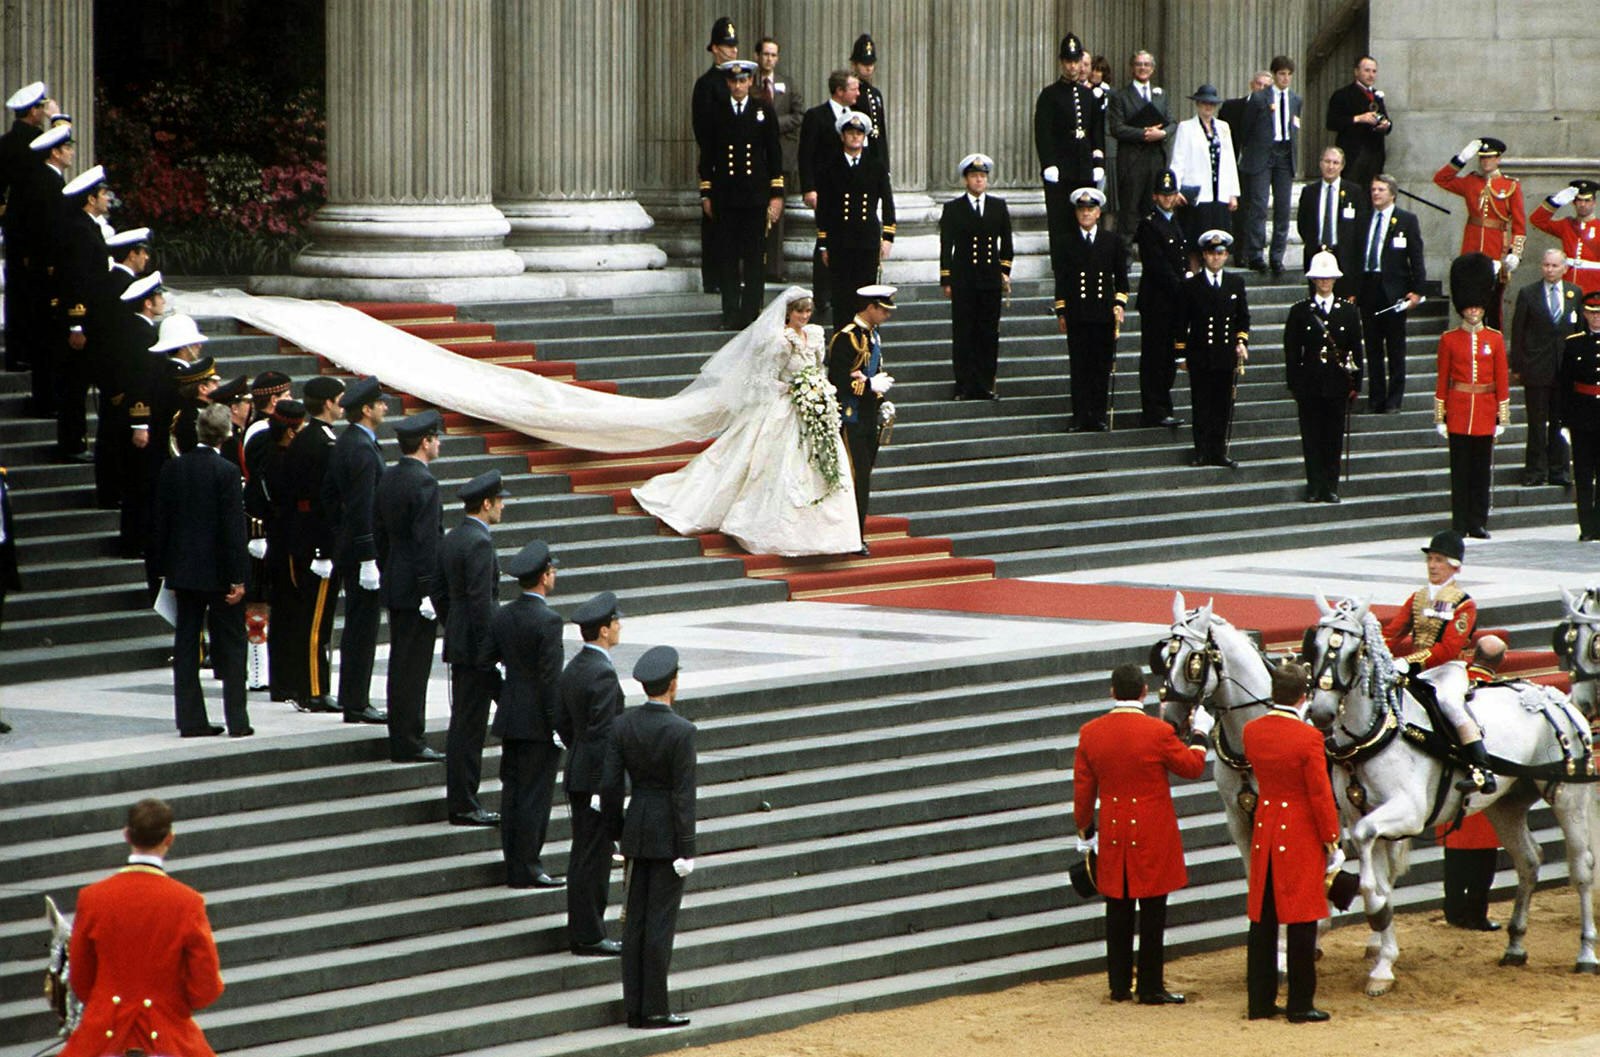 The steps of St Paul's Catheral are lined with uniformed service people as Charles and Diana (with remarkable dress train in tow) make their way down the red carpet steps to a waiting horse-drawn carriage© Jayne Fincher / Princess Diana Archive / Getty Images